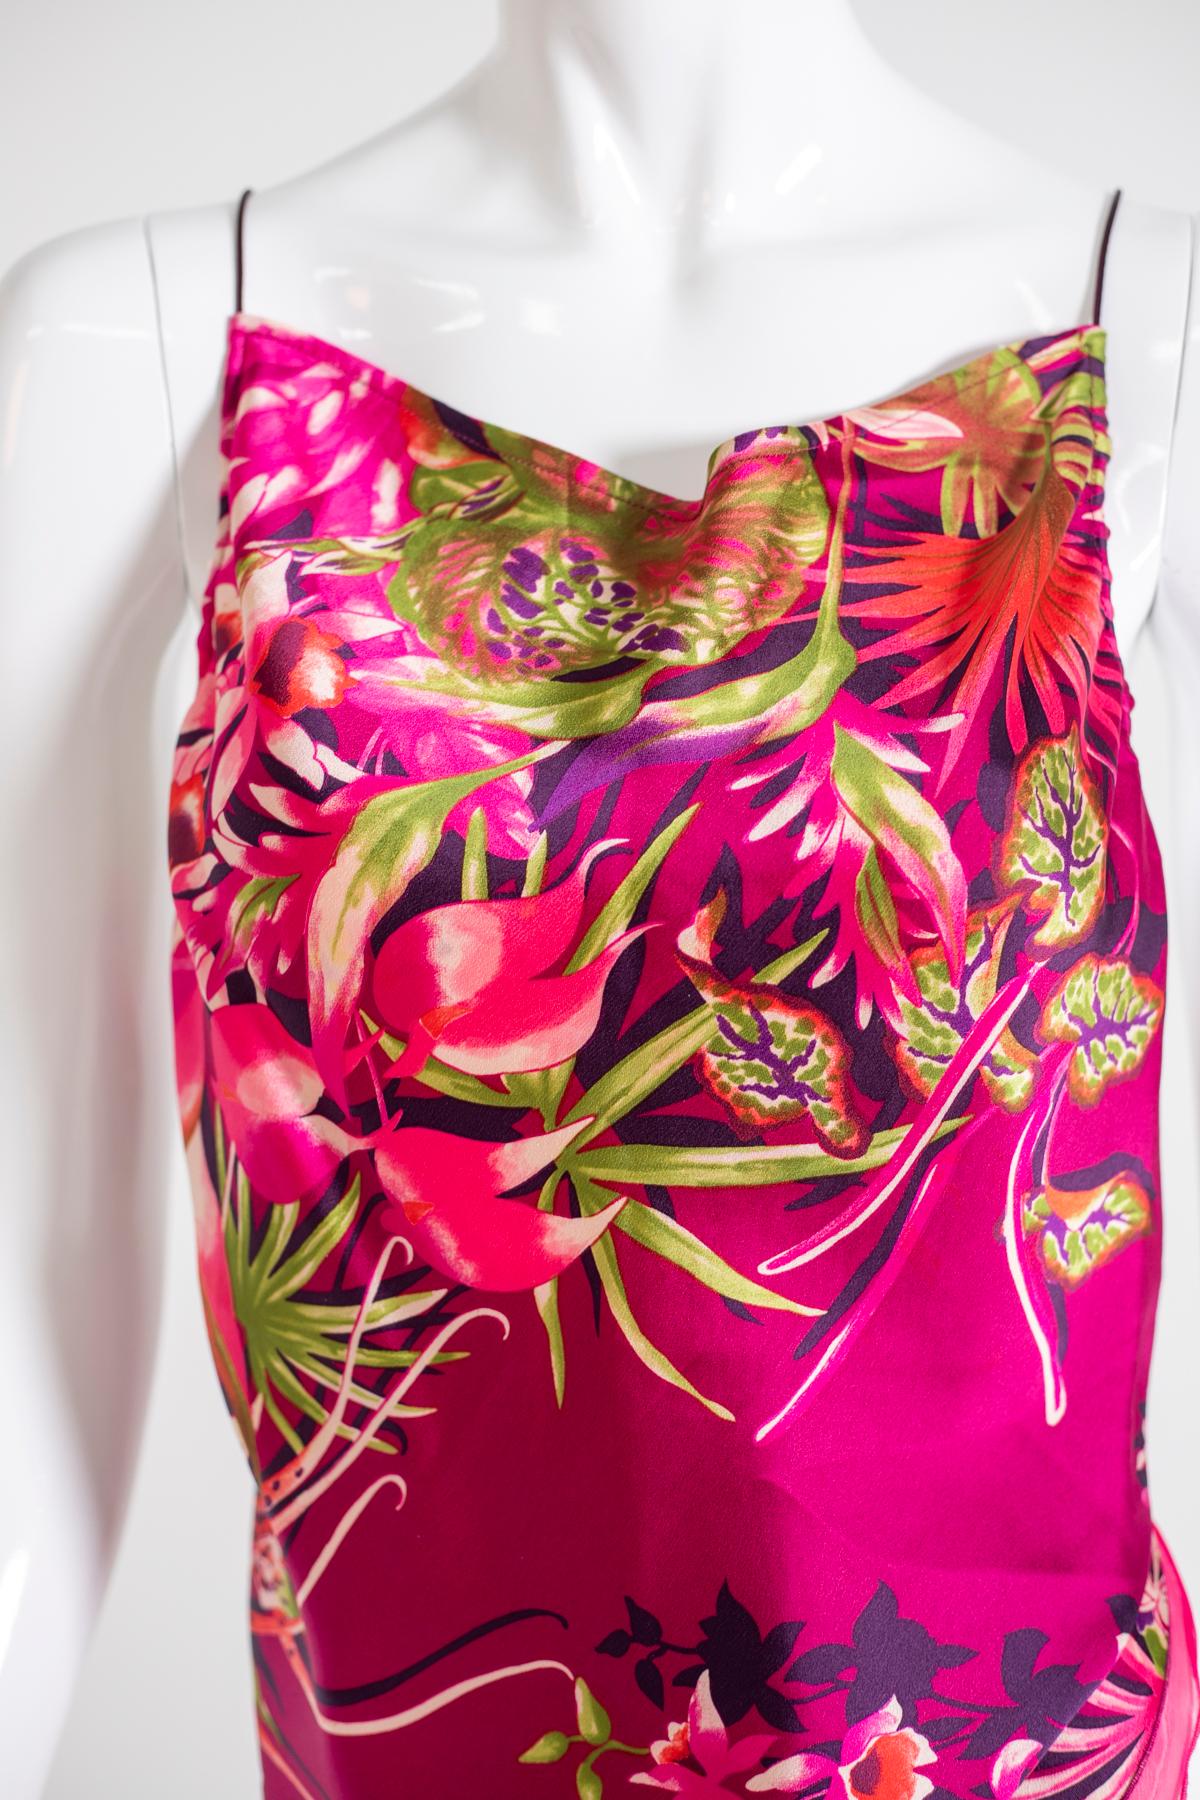 Beautiful summer kenzo t-shirt with tropical pattern and fuschia background. The shirt is made of soft silk. The straps are thin and cross on the back. Perfect worn with a pair of elegant trousers or even with jeans. Size 40 EU. 

- Kenzo Paris
-